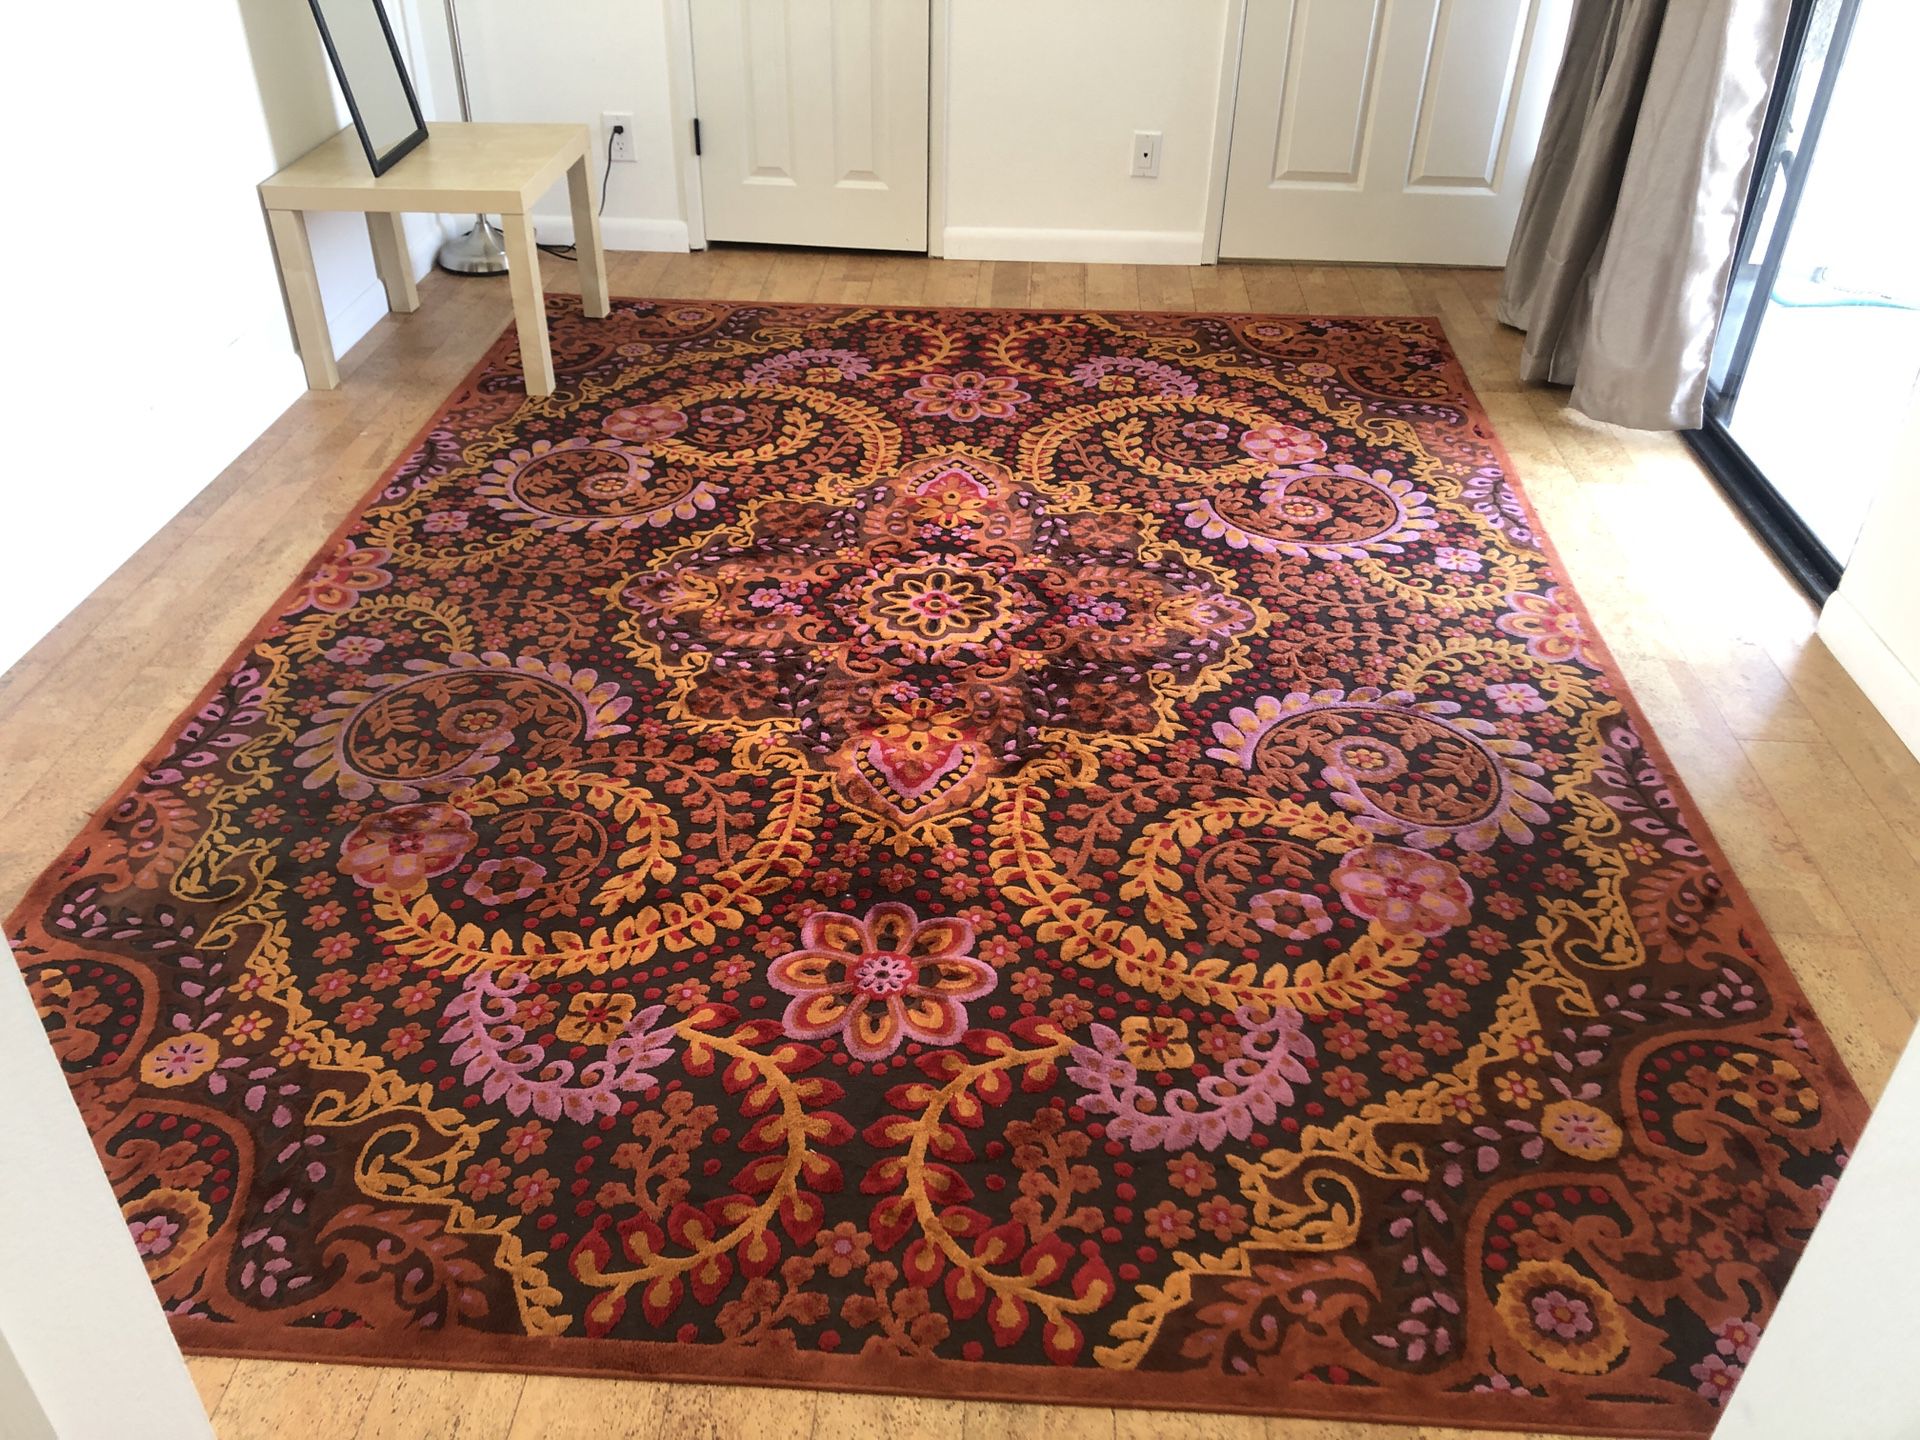 Colorful 7.5 x 10’ Rug - Great Condition!